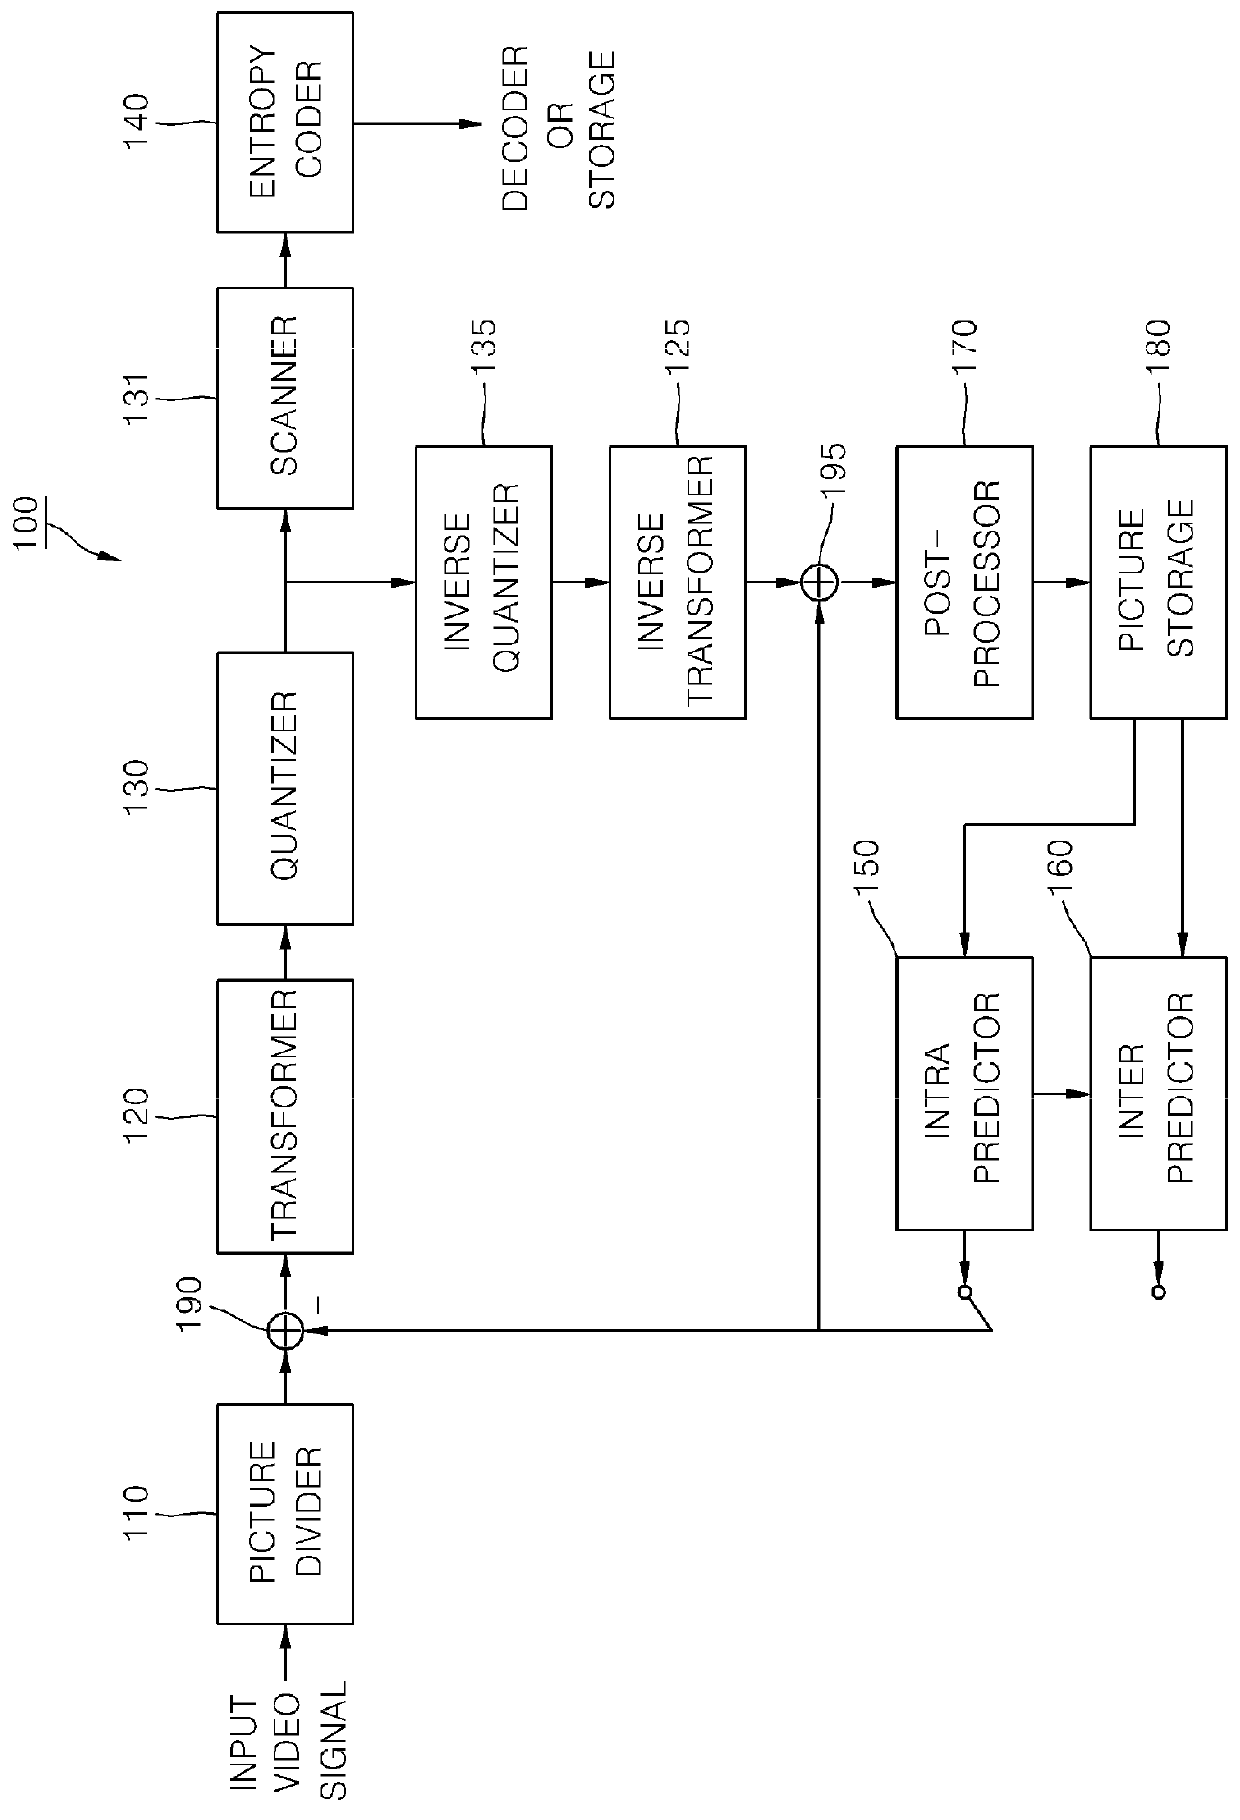 Apparatus for Encoding an Image